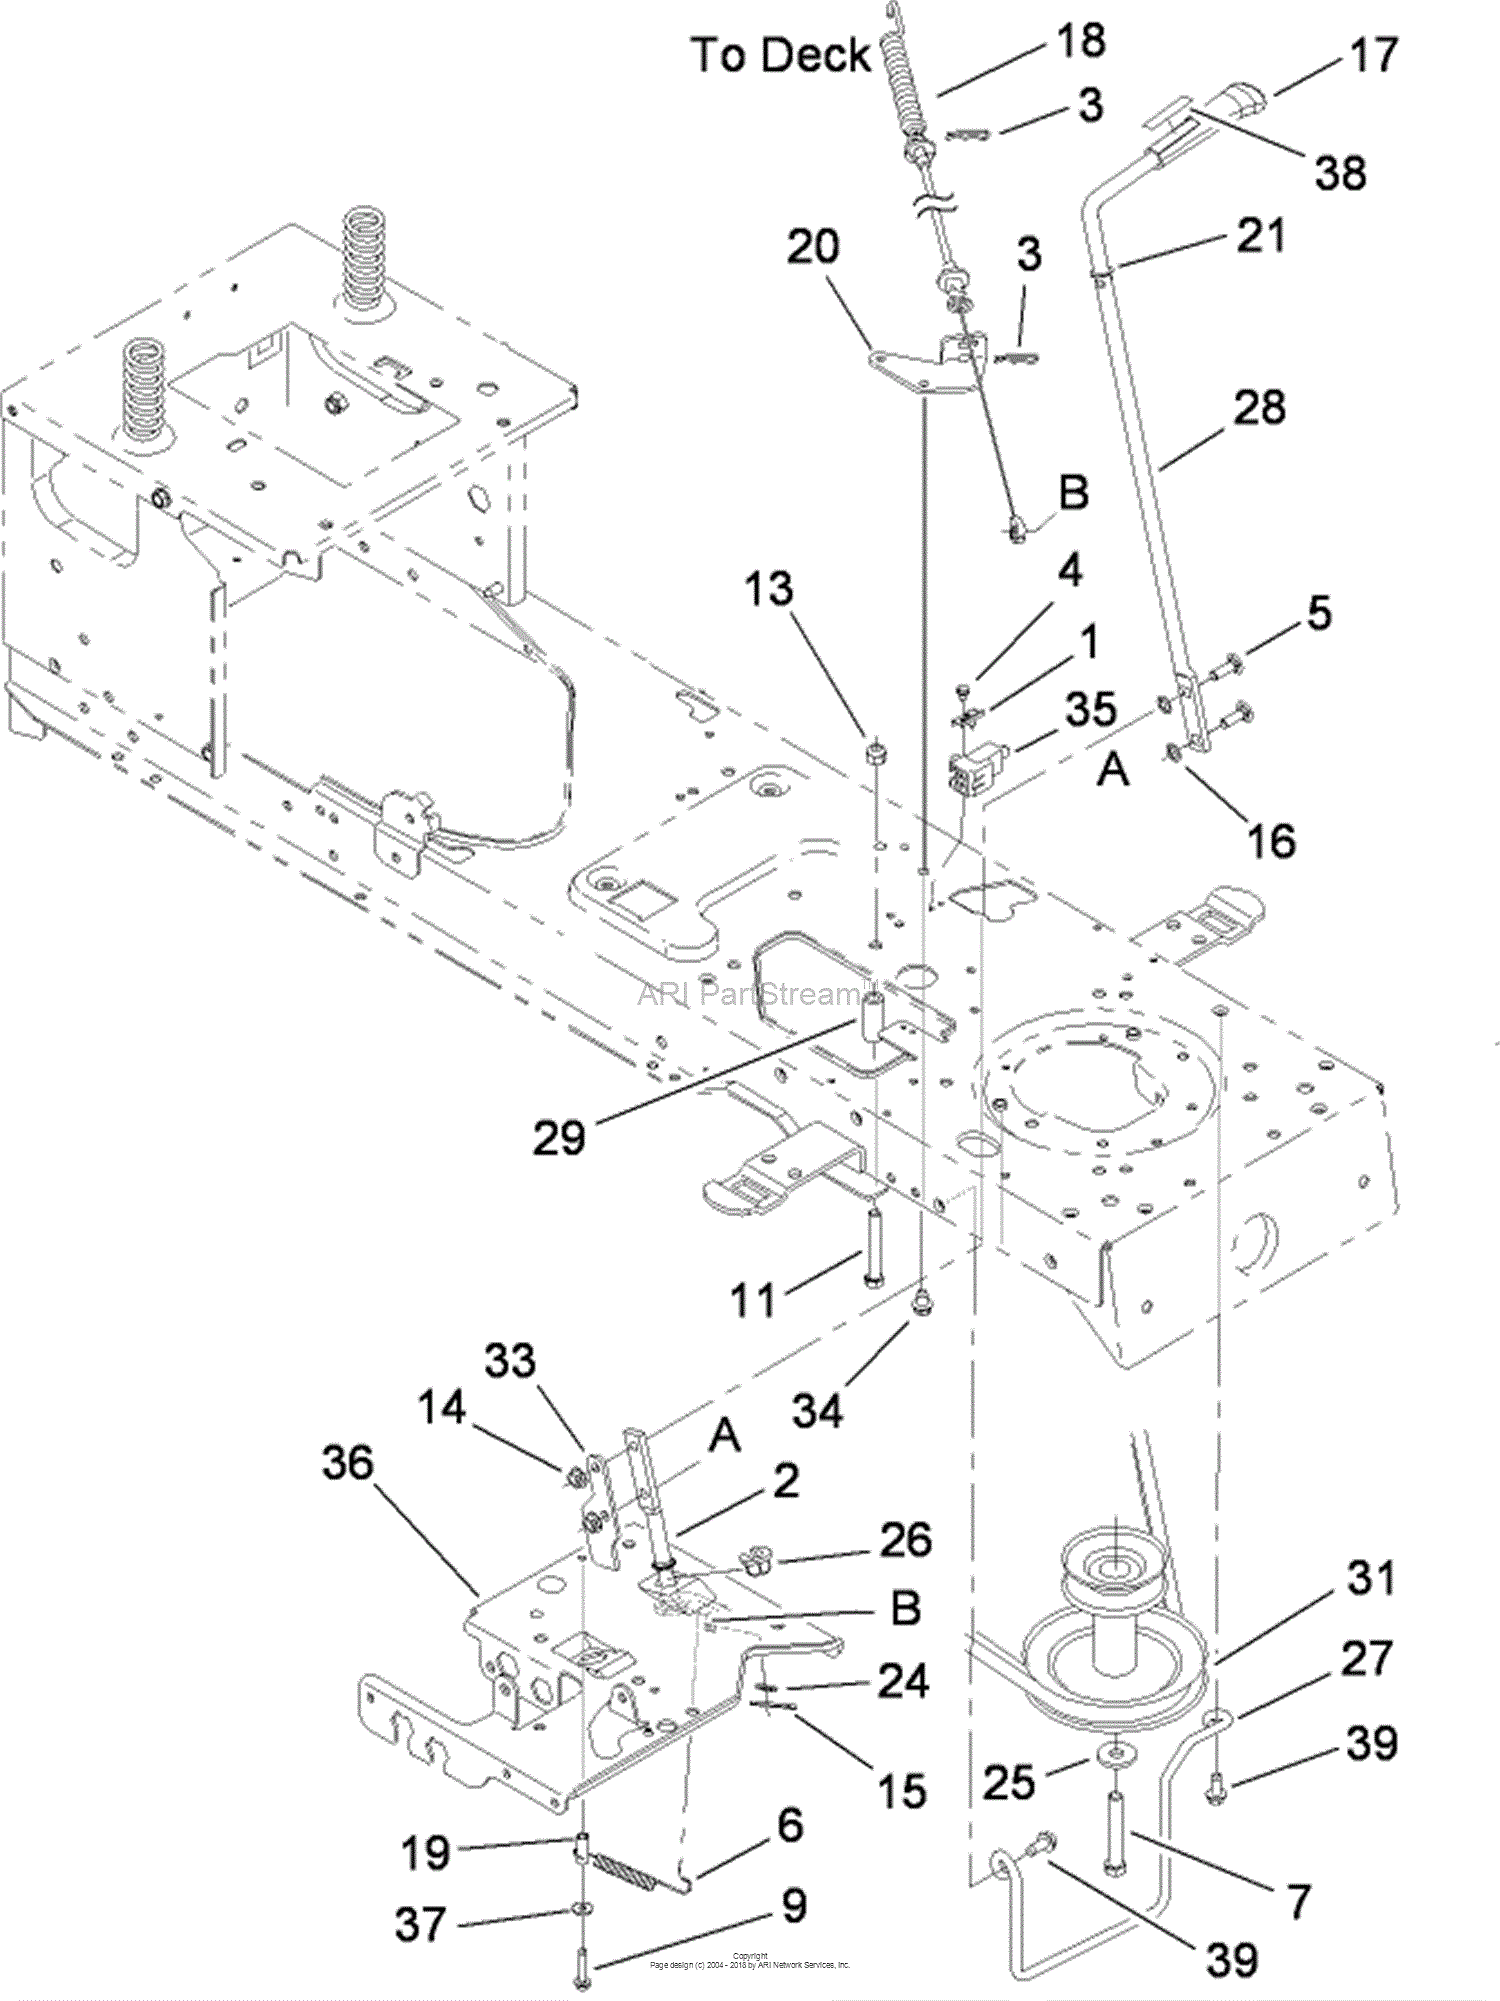 Toro 13bx60rg748 Lx425 Lawn Tractor 2007 Sn 1e087h10251 Parts Diagram For Pto Engage Assembly